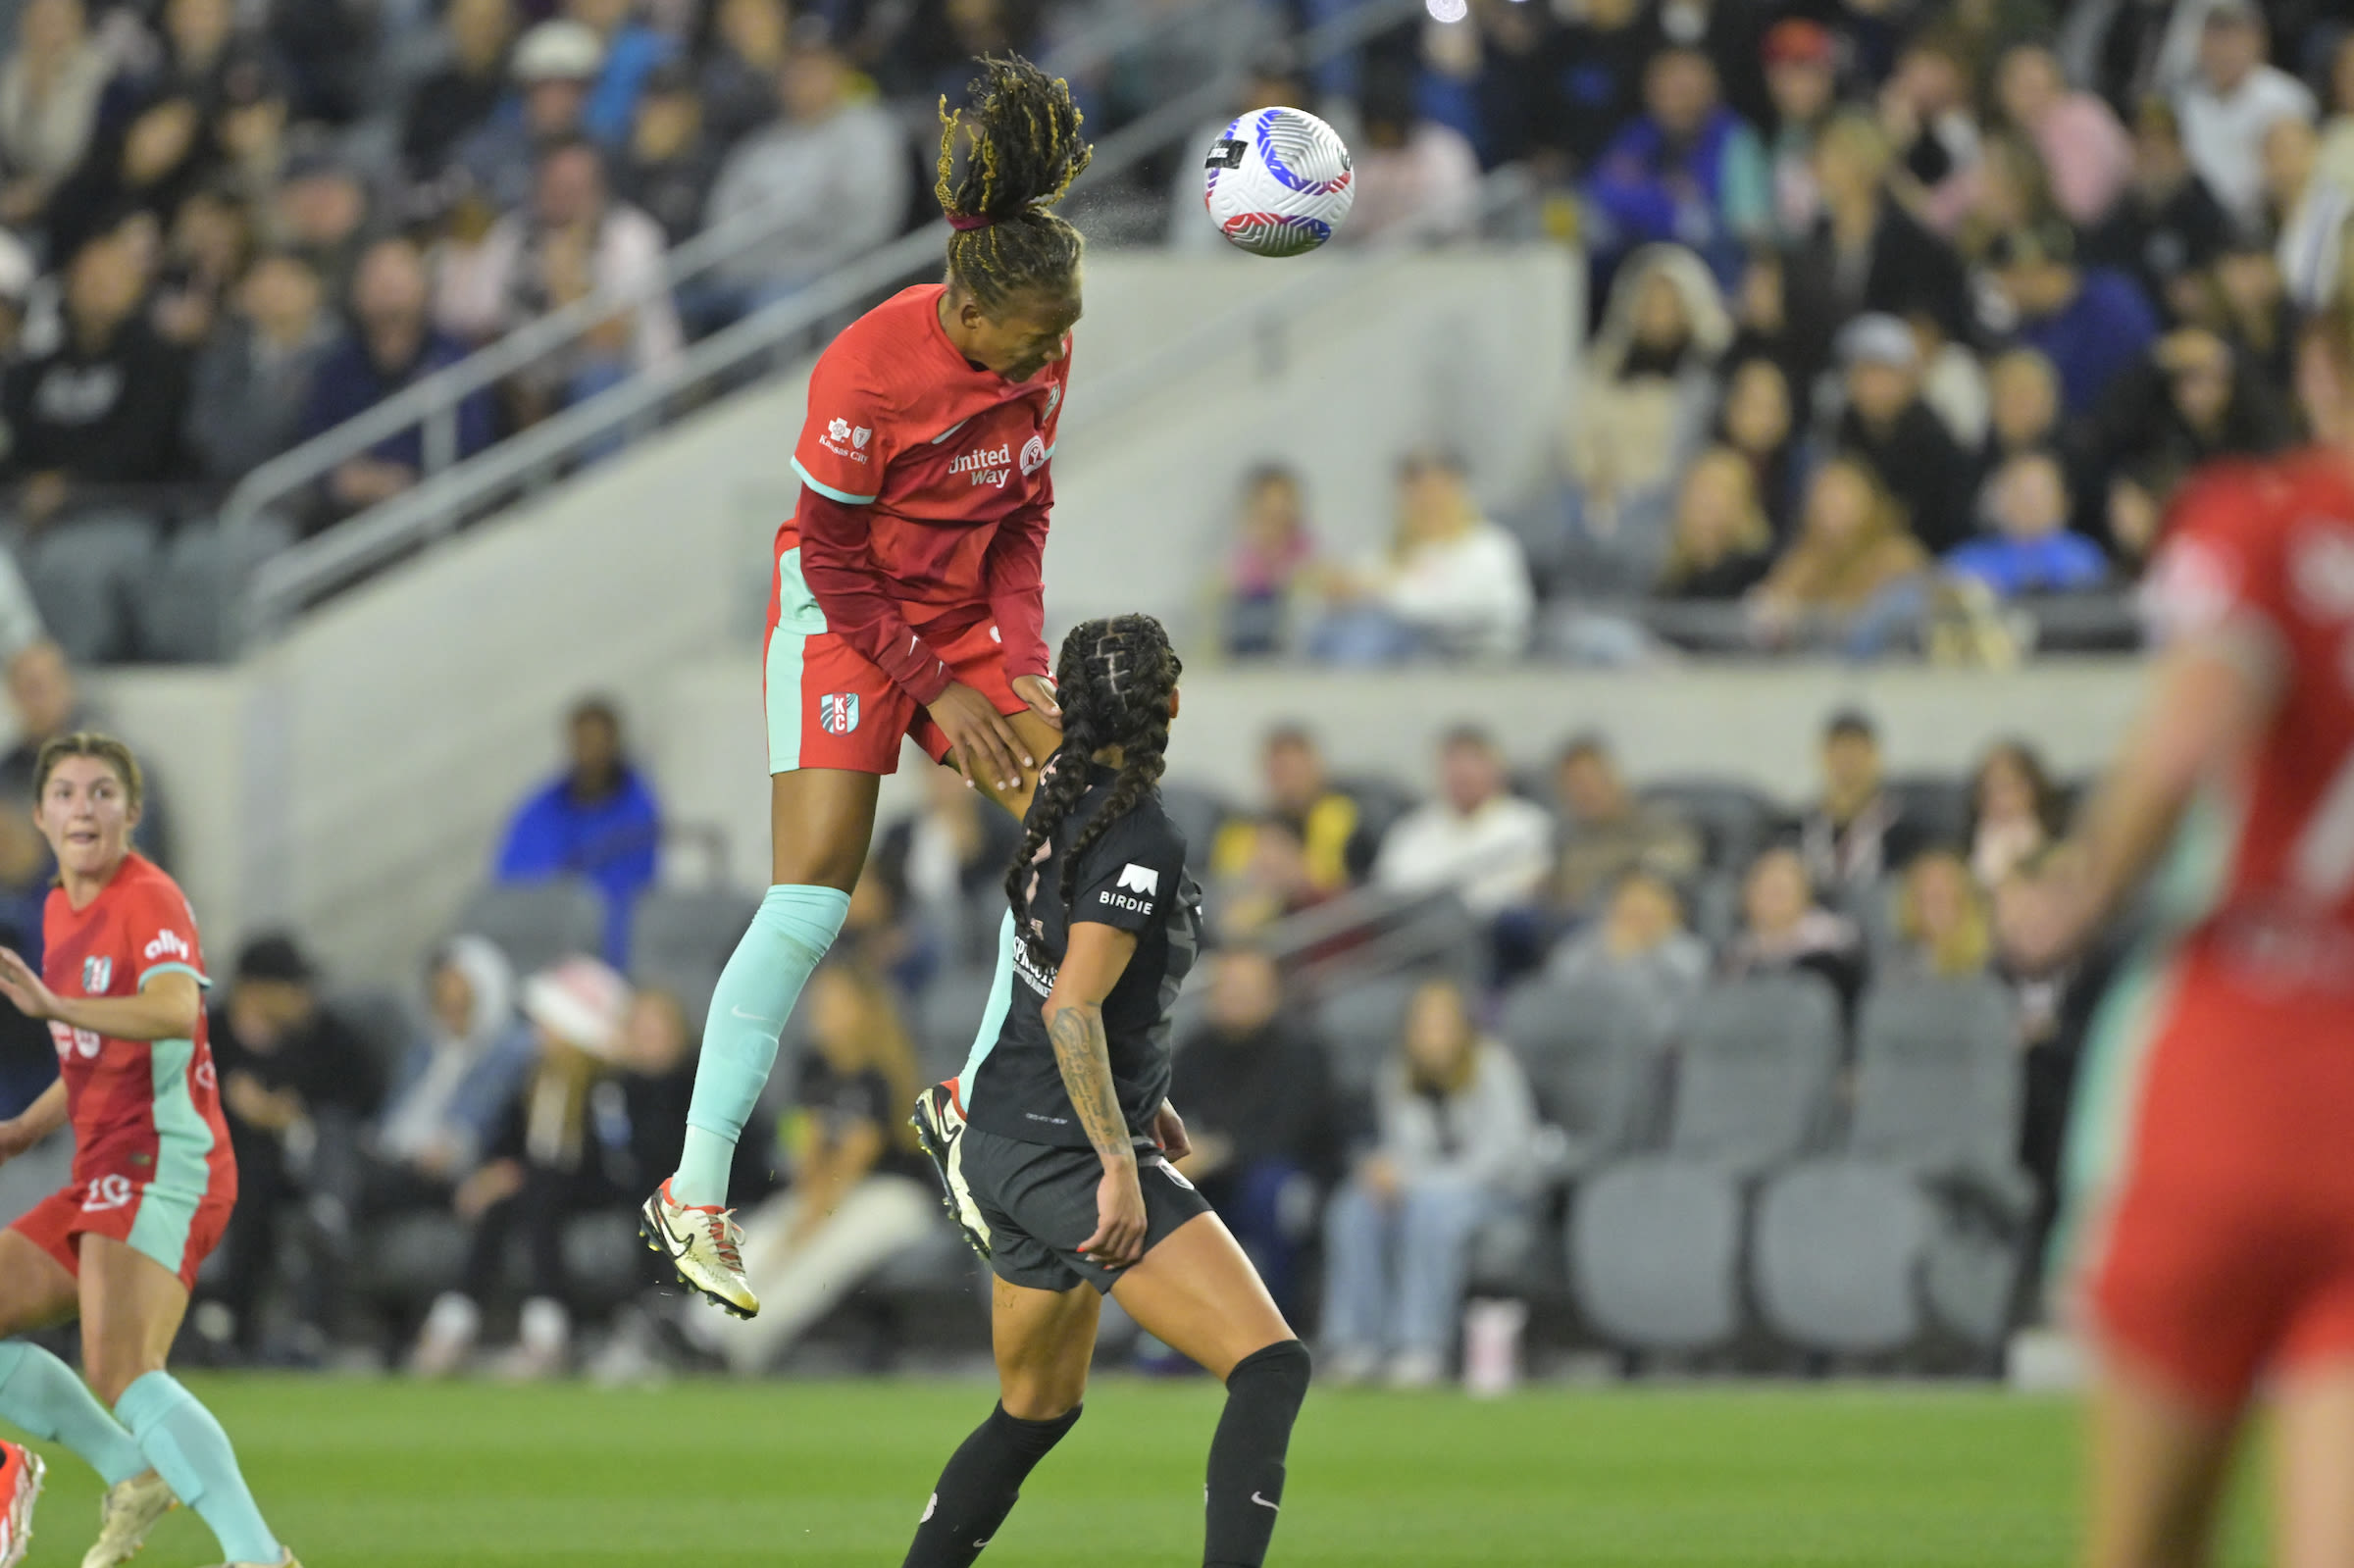 NWSL: Current and Pride remain unbeaten - Soccer America